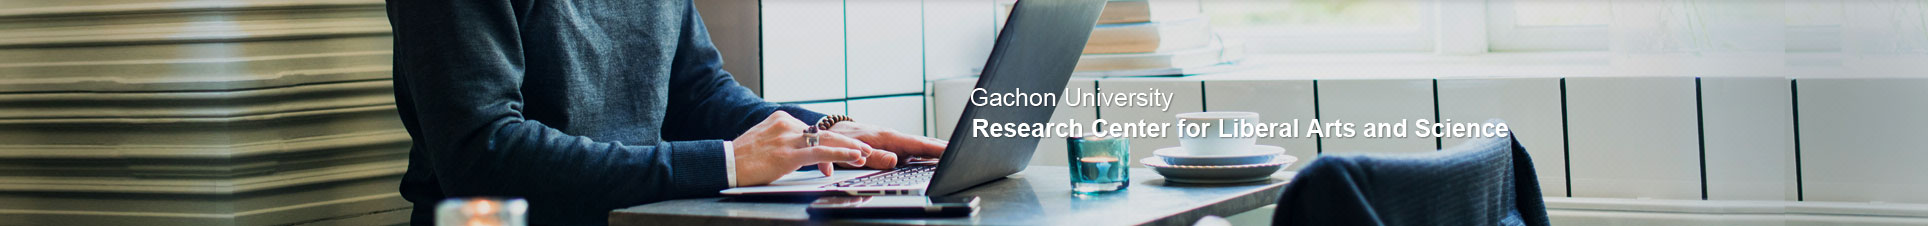 Gachon University Research Center for Liberal Arts and Science